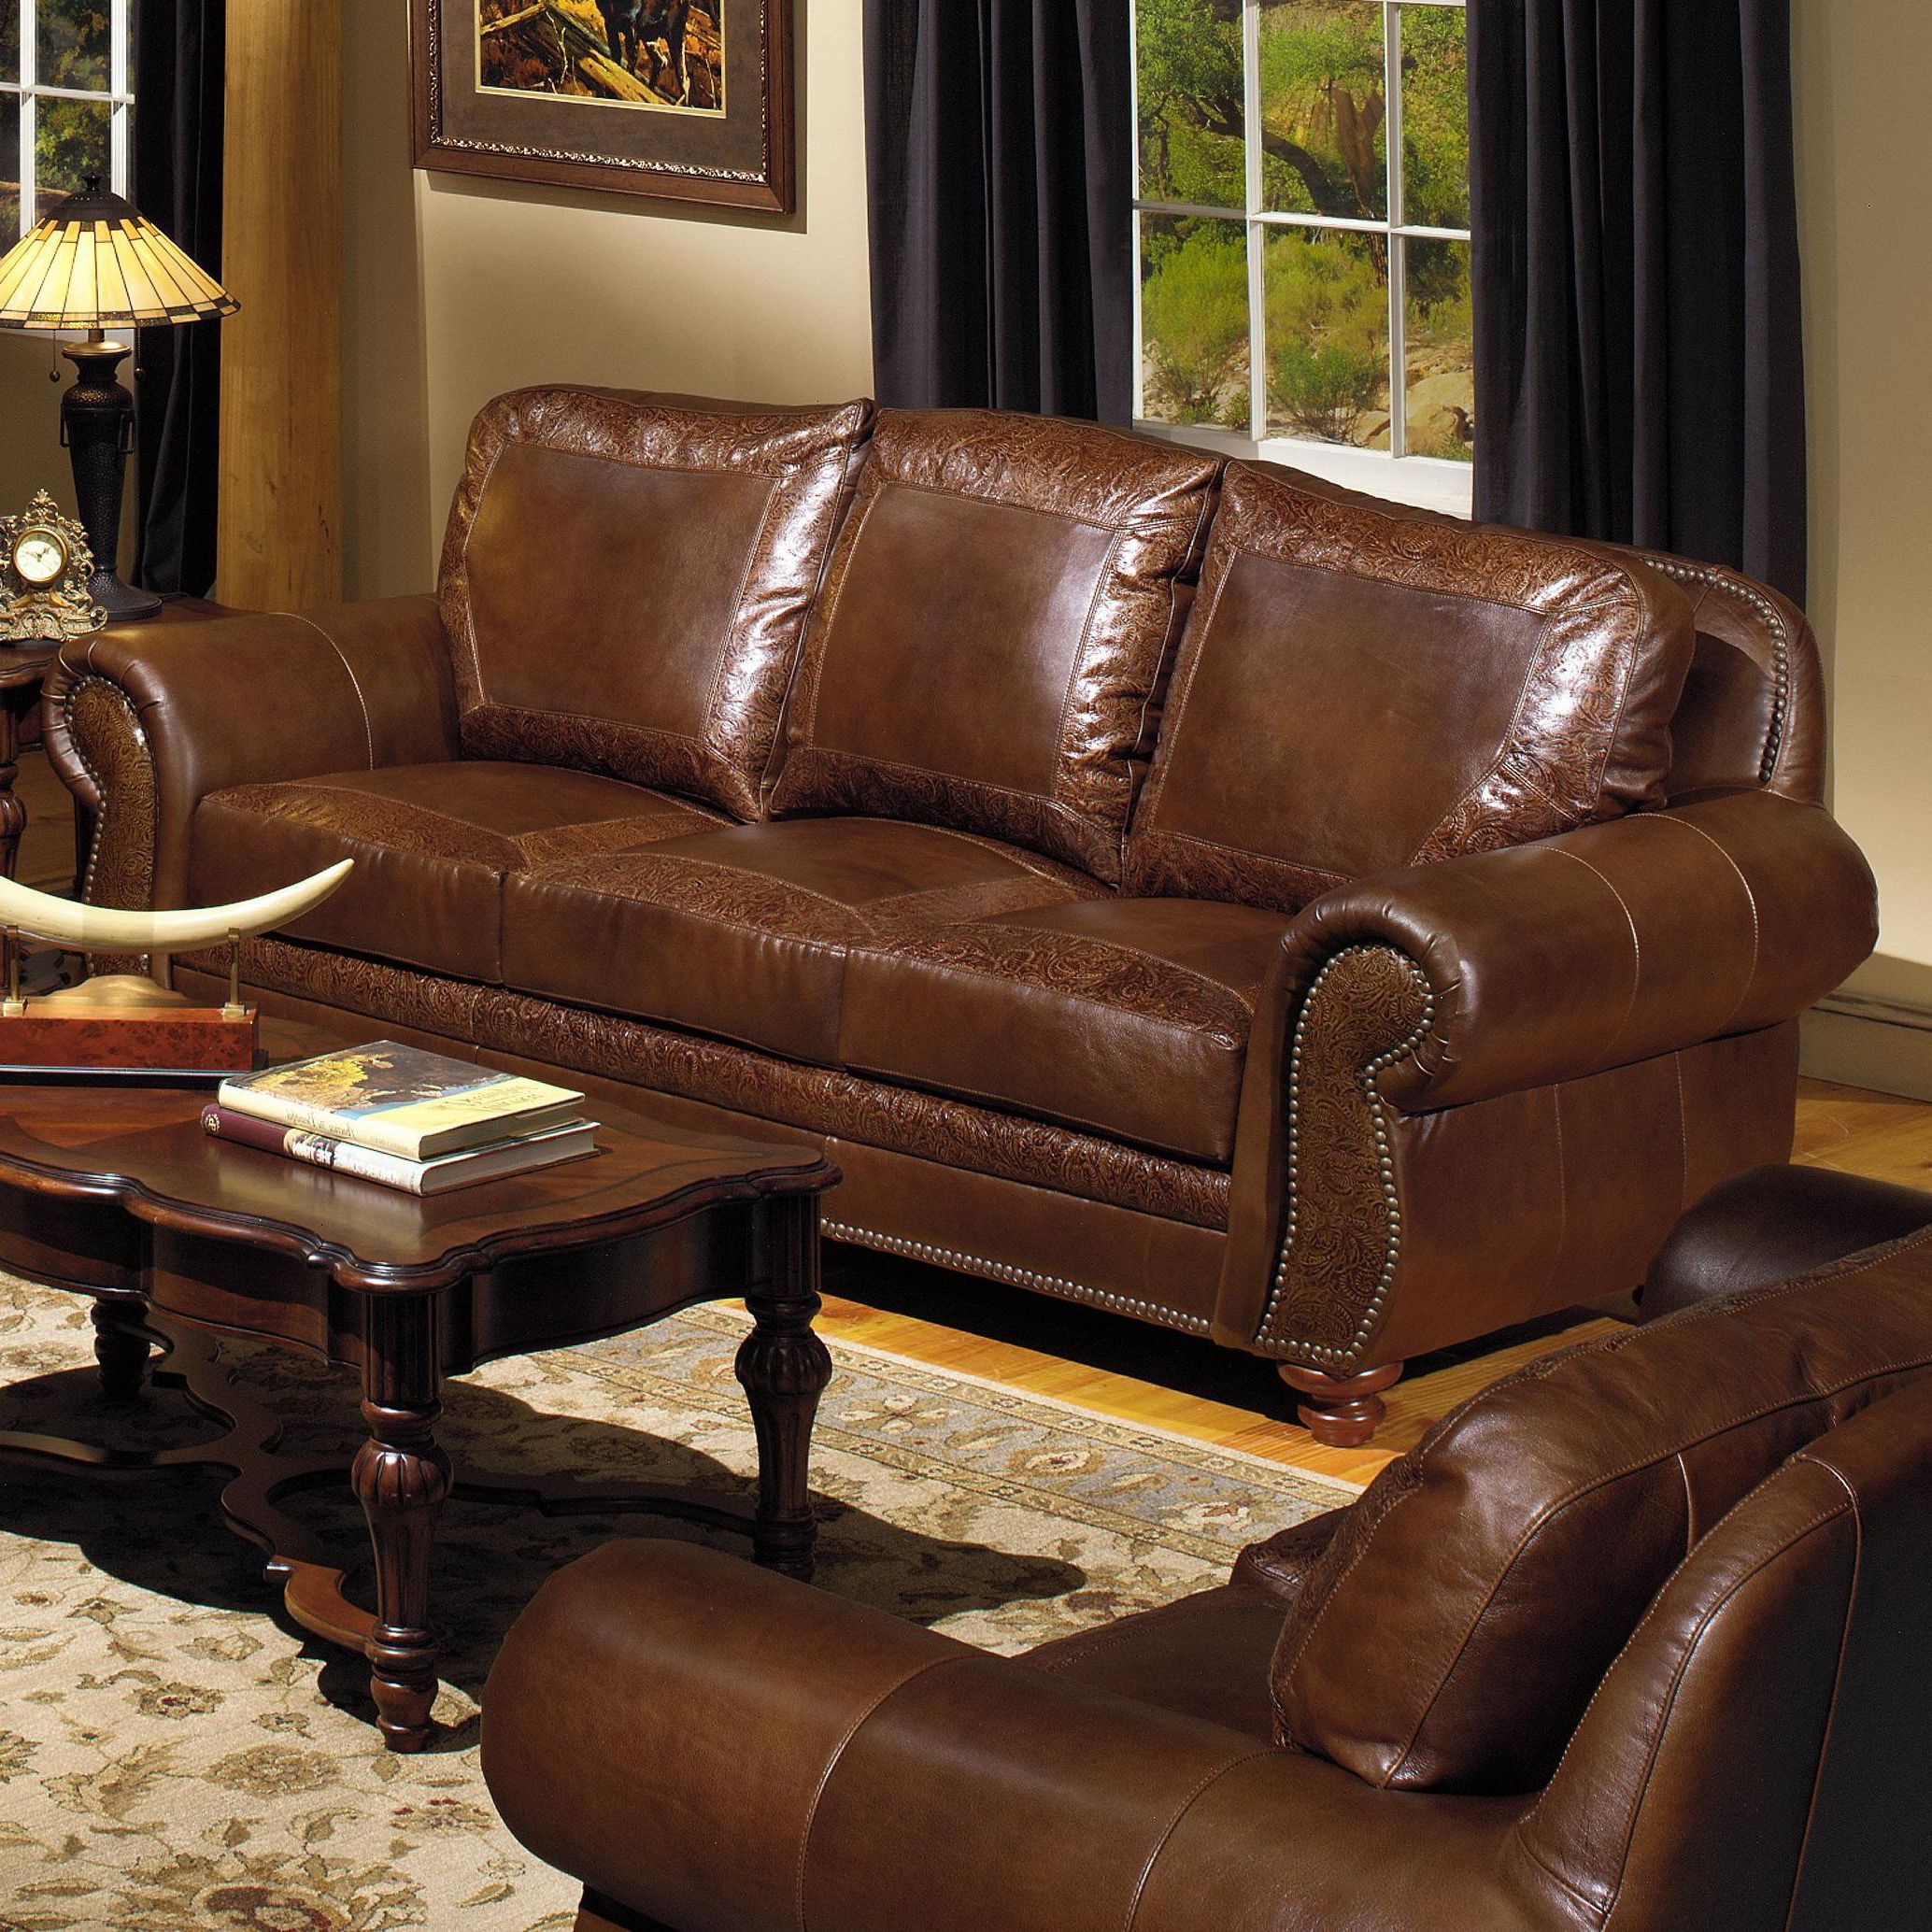 Brown Top Grain Leather Sofa For Most Popular Top Grain Leather Loveseats (View 12 of 15)